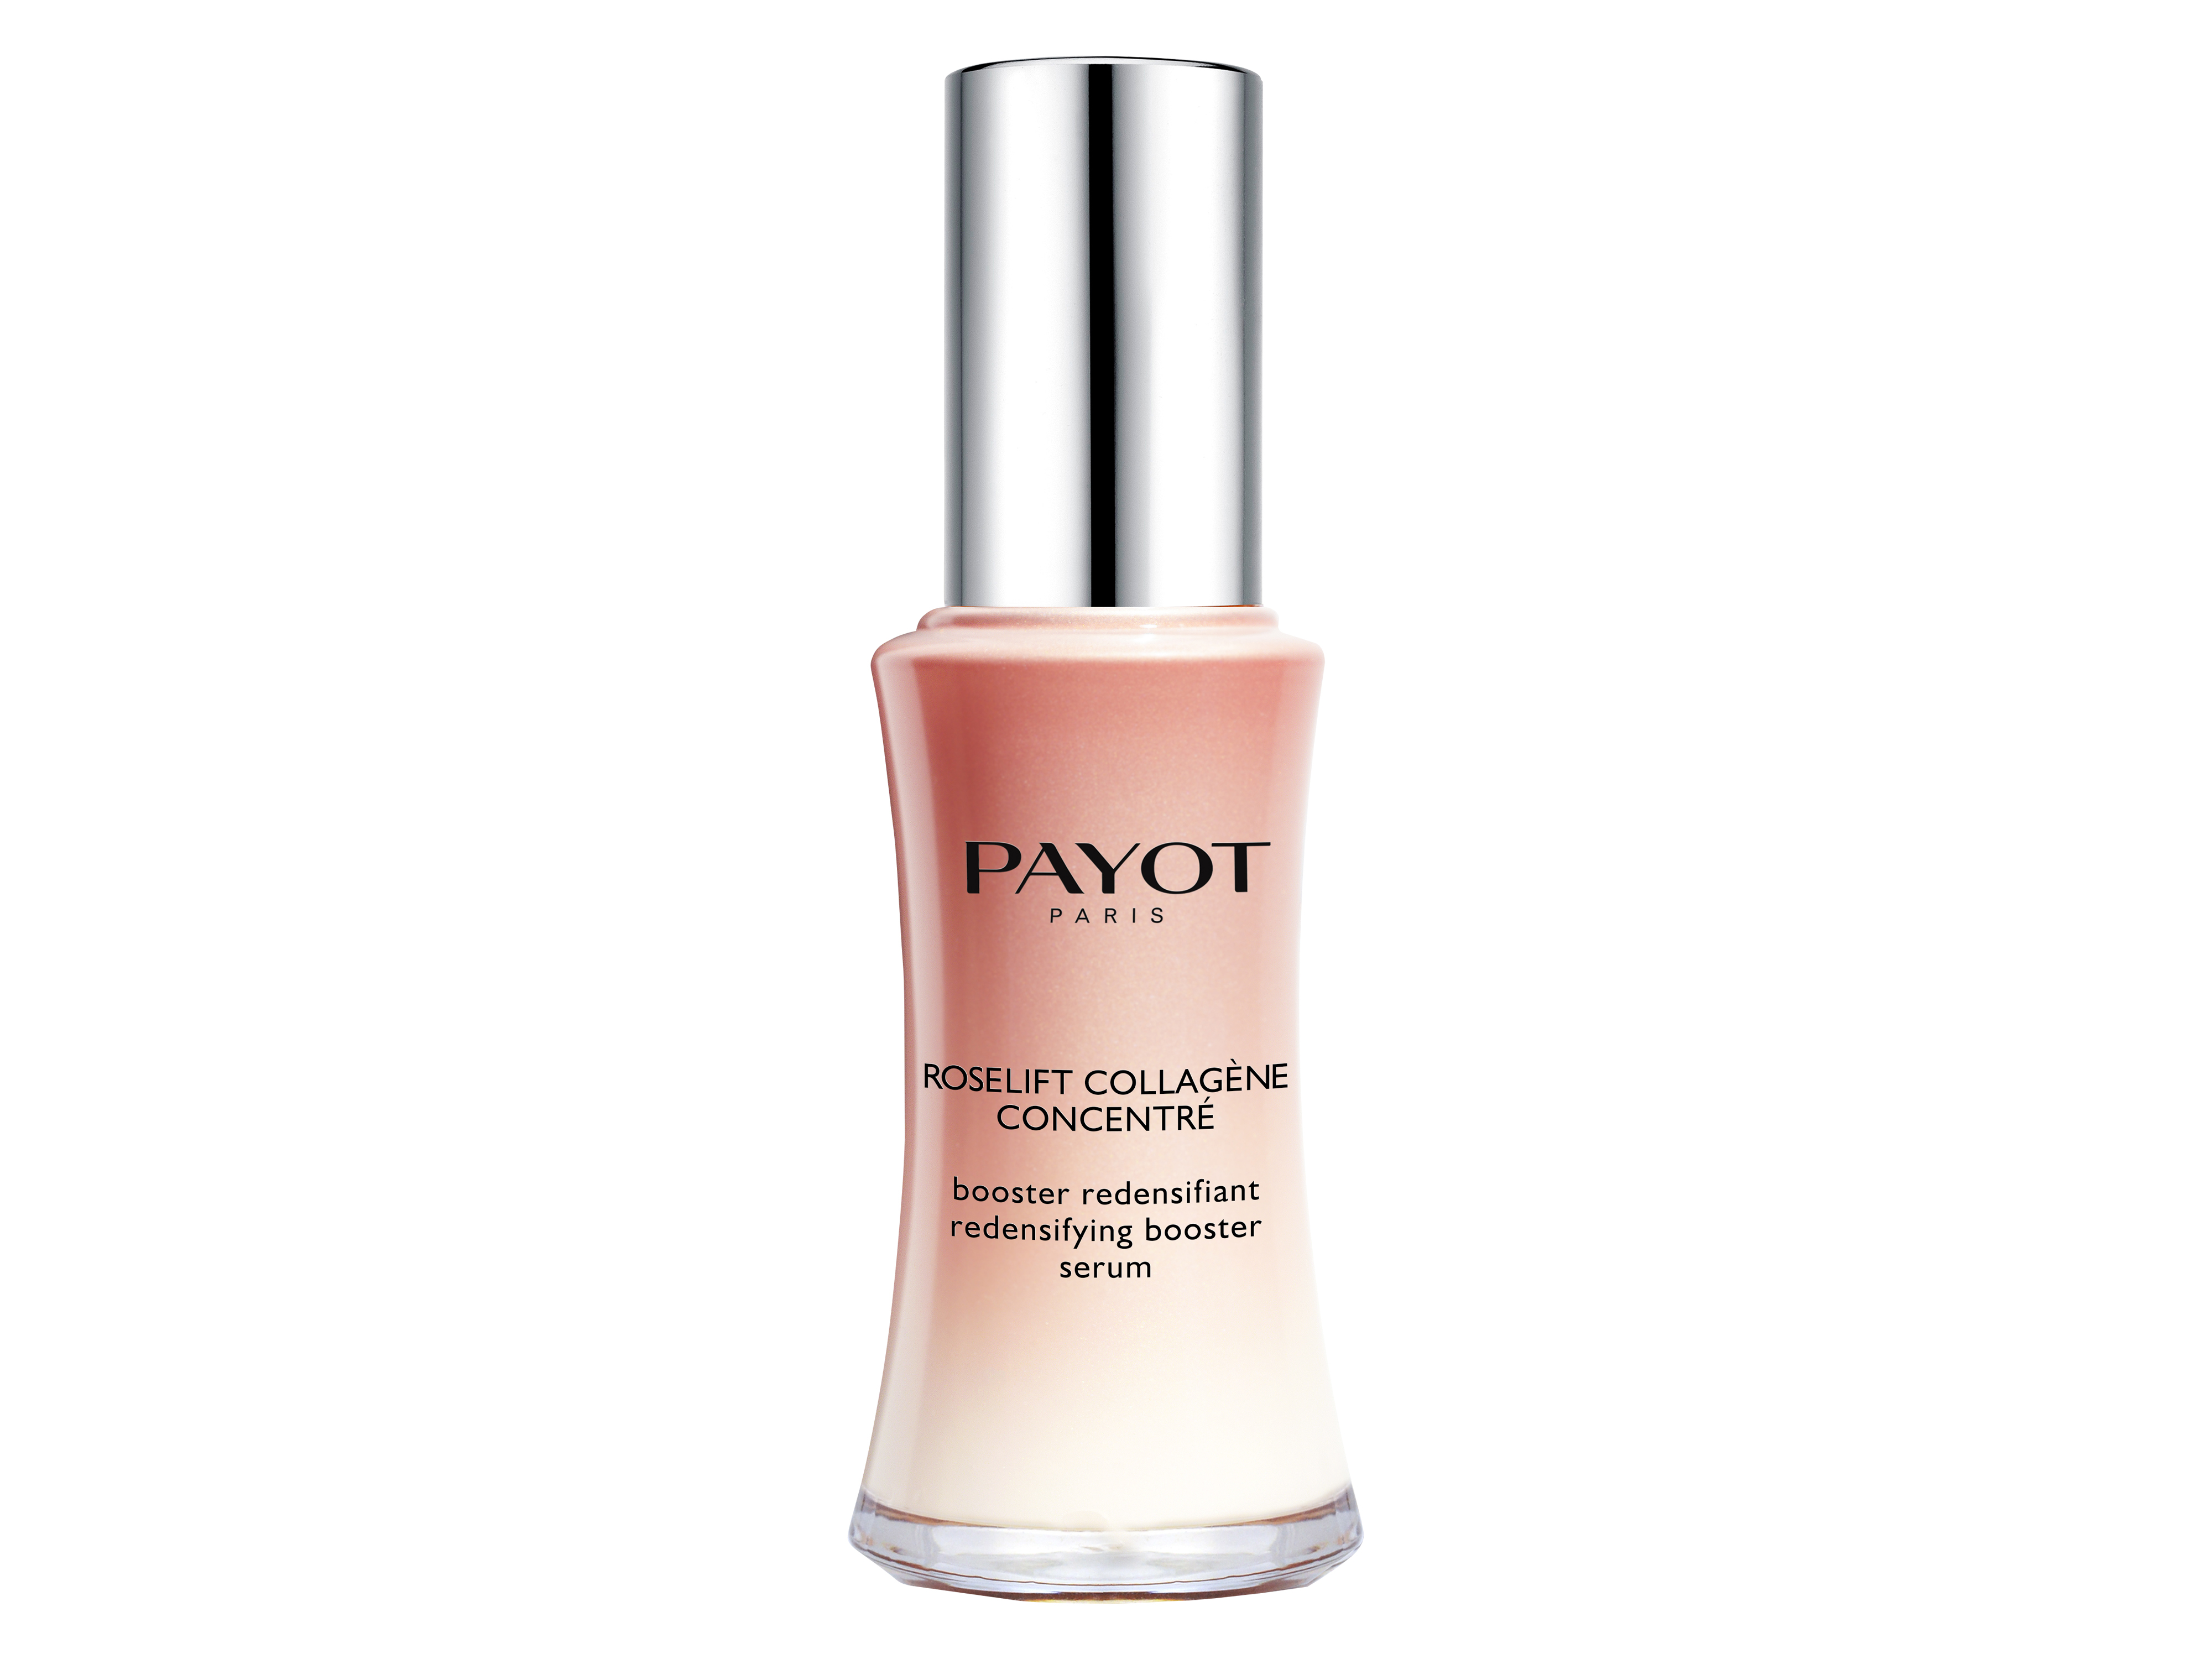 Payot Roselift Collagene Concentre, 30 ml